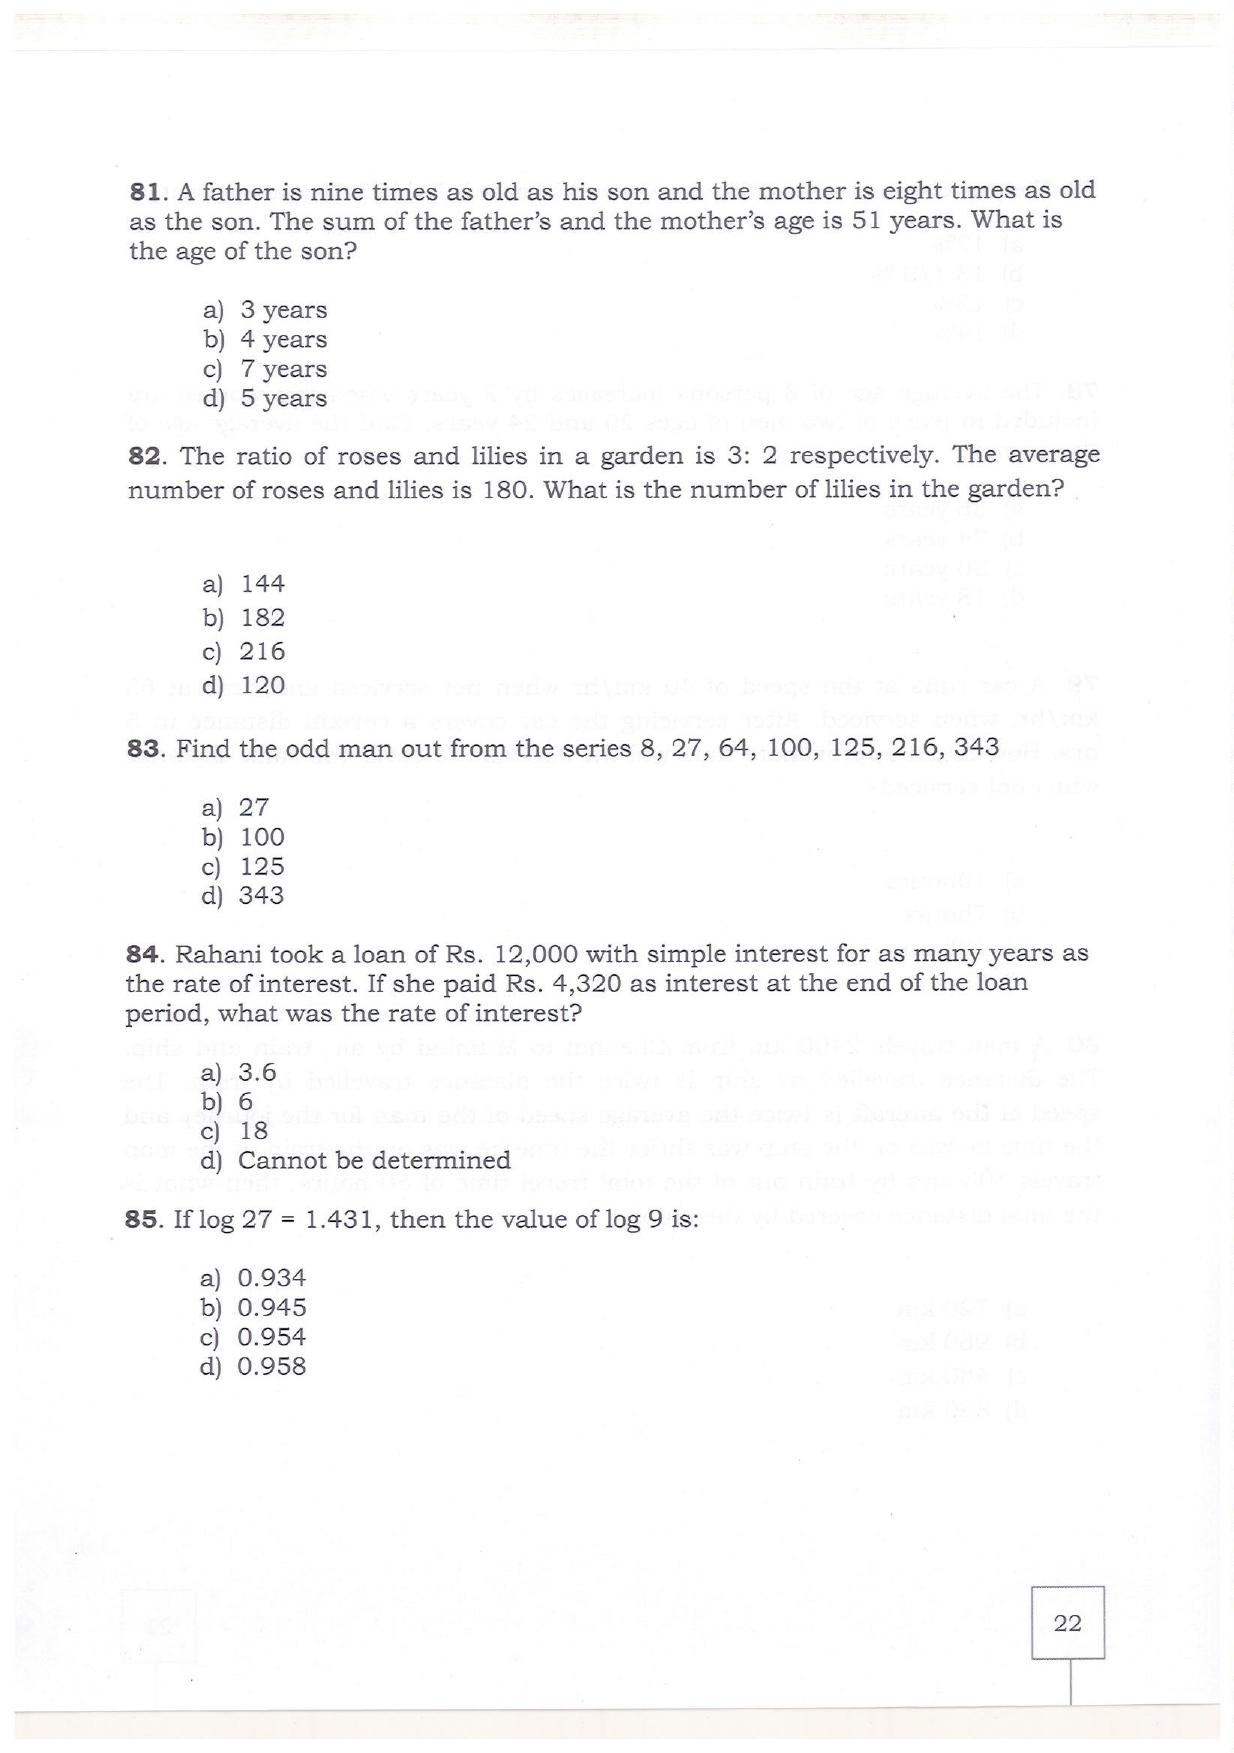 KMAT Question Papers - February 2019 - Page 20